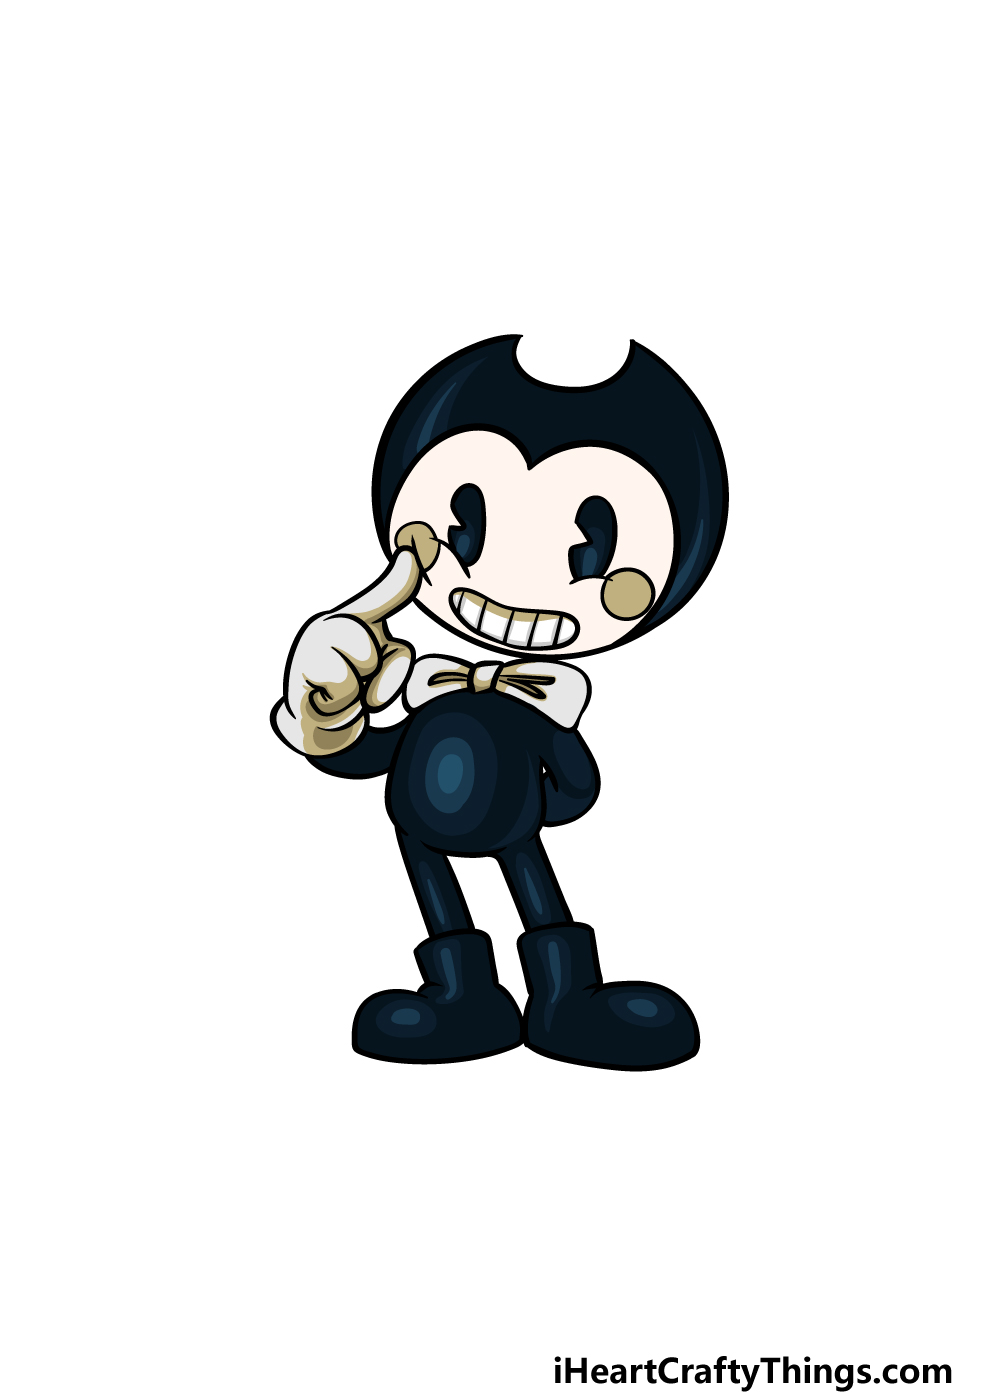 Bendy Drawing - How To Draw Bendy Step By Step